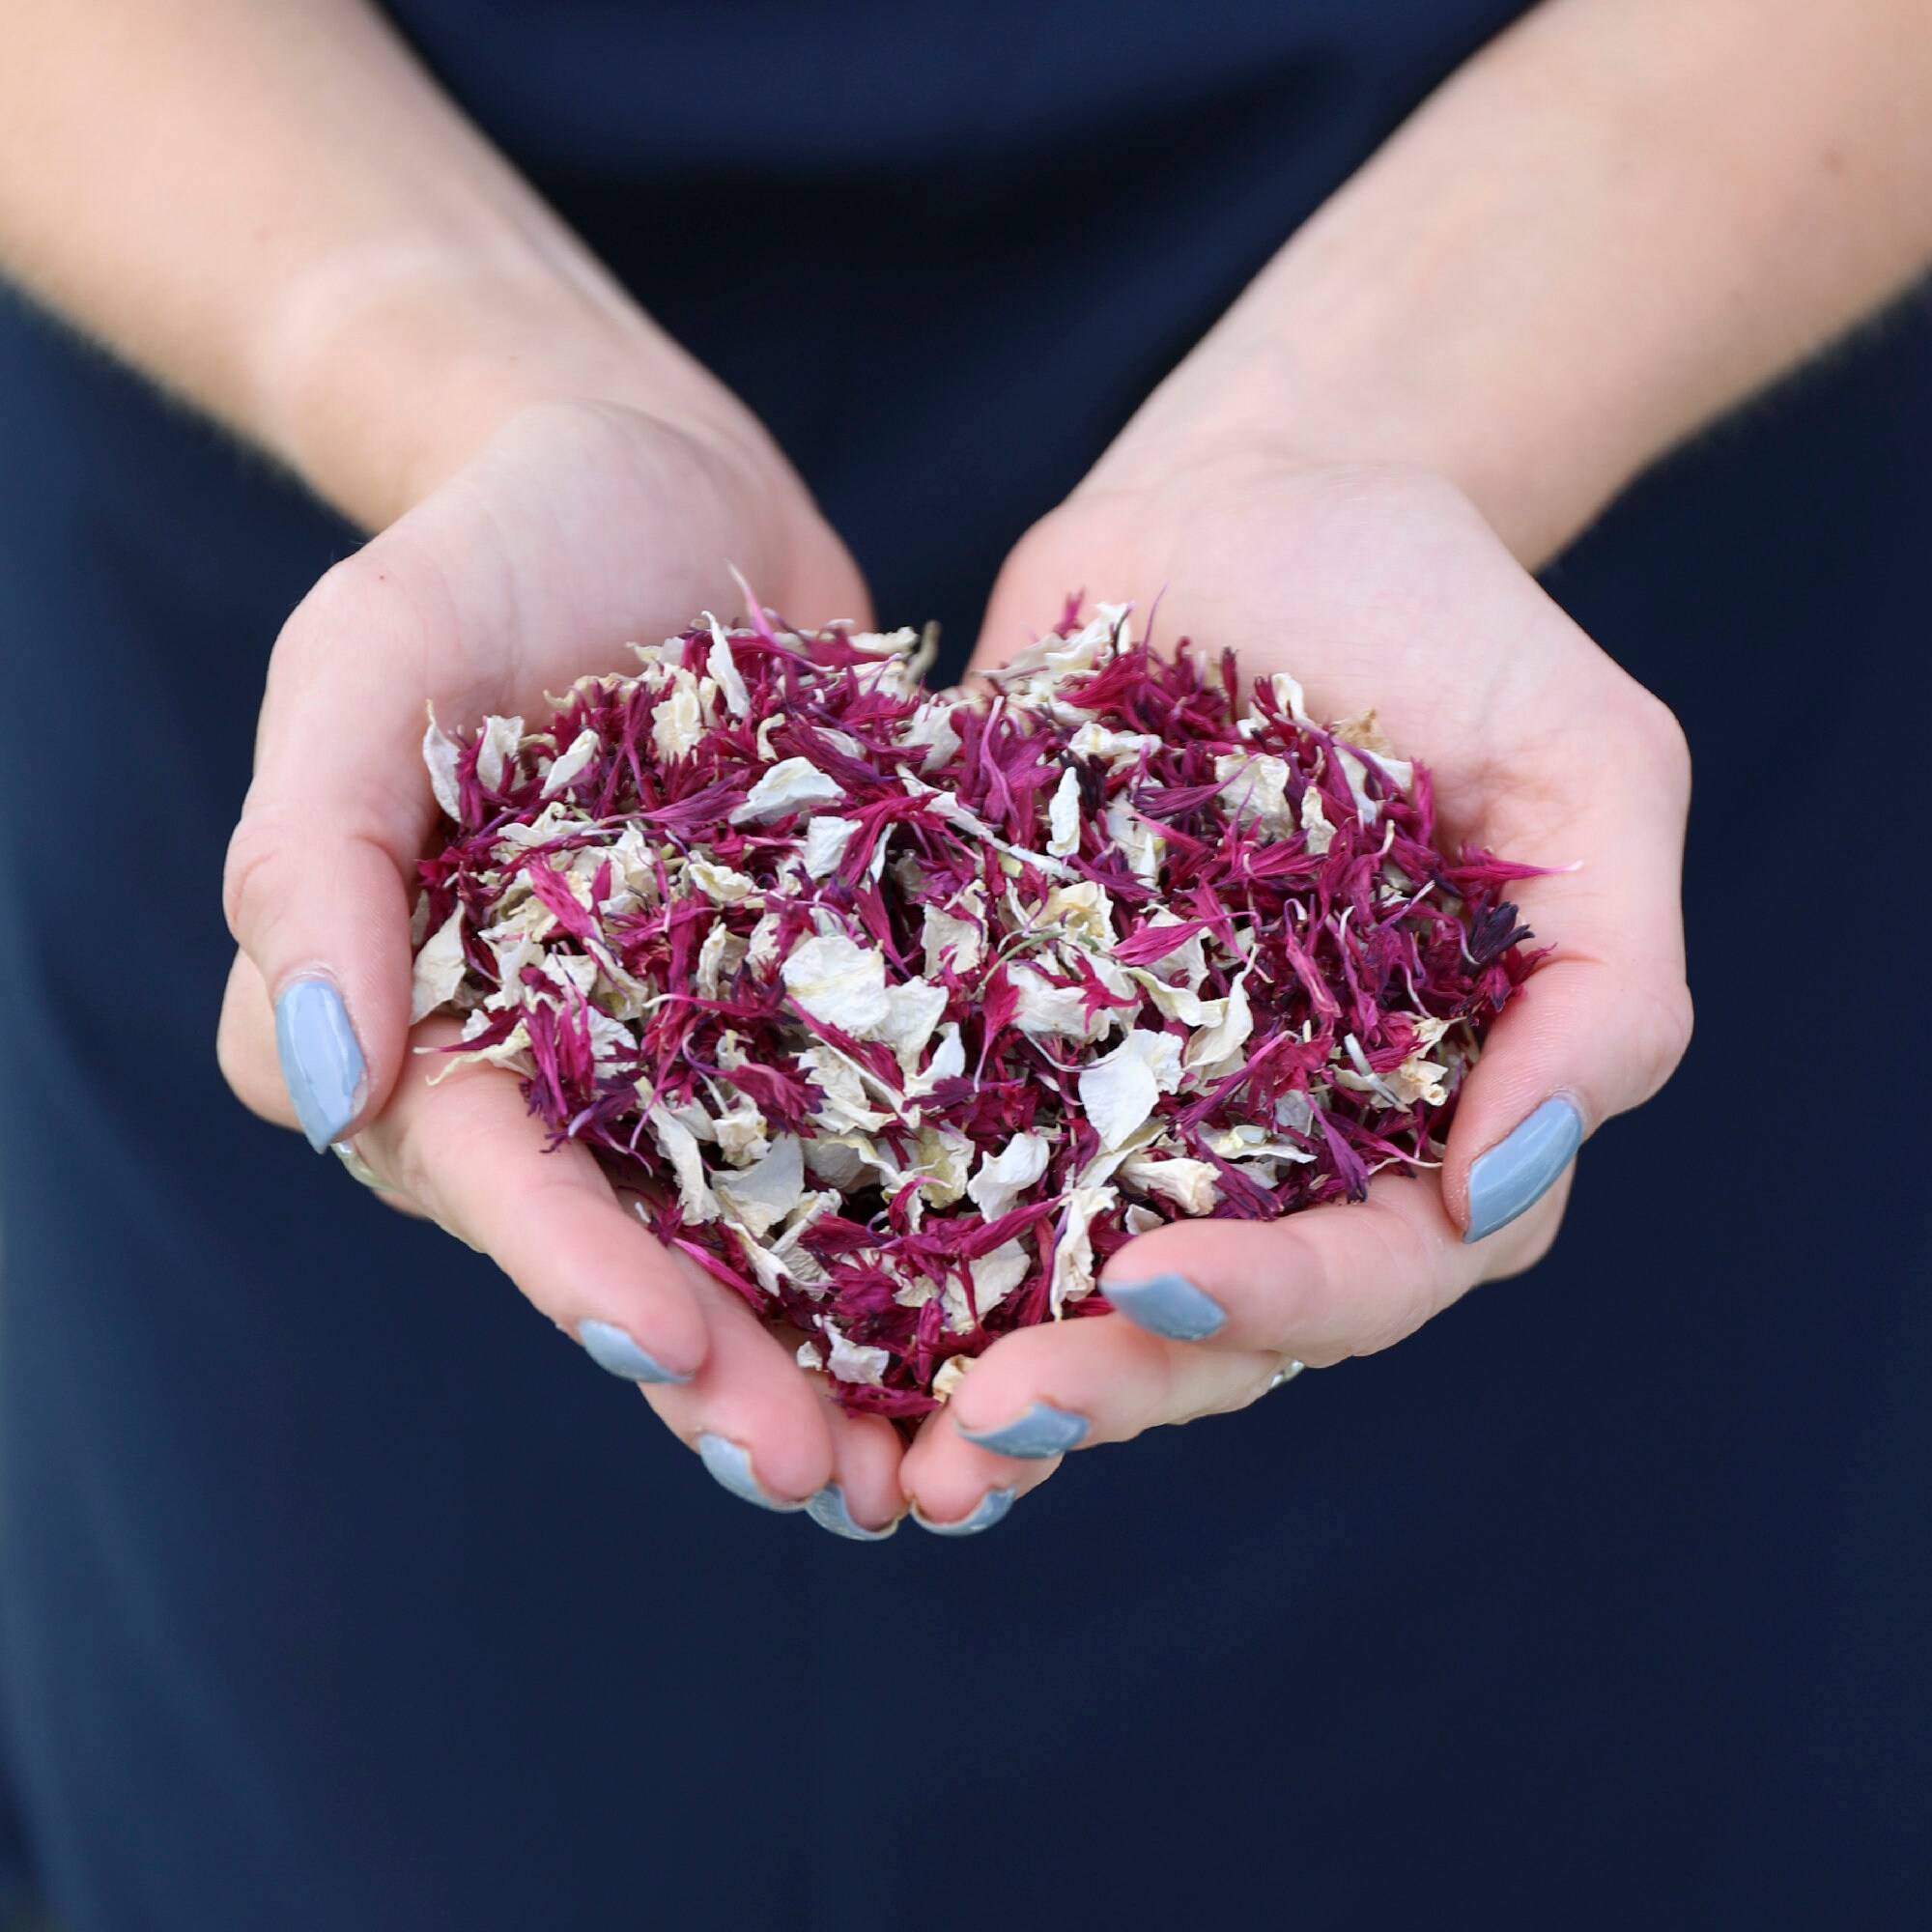 Dried Rose Petals 50g Natural Dried Flowers Dried Flower Petals Rustic Boho  Wedding Biodegradable Natural Confetti 